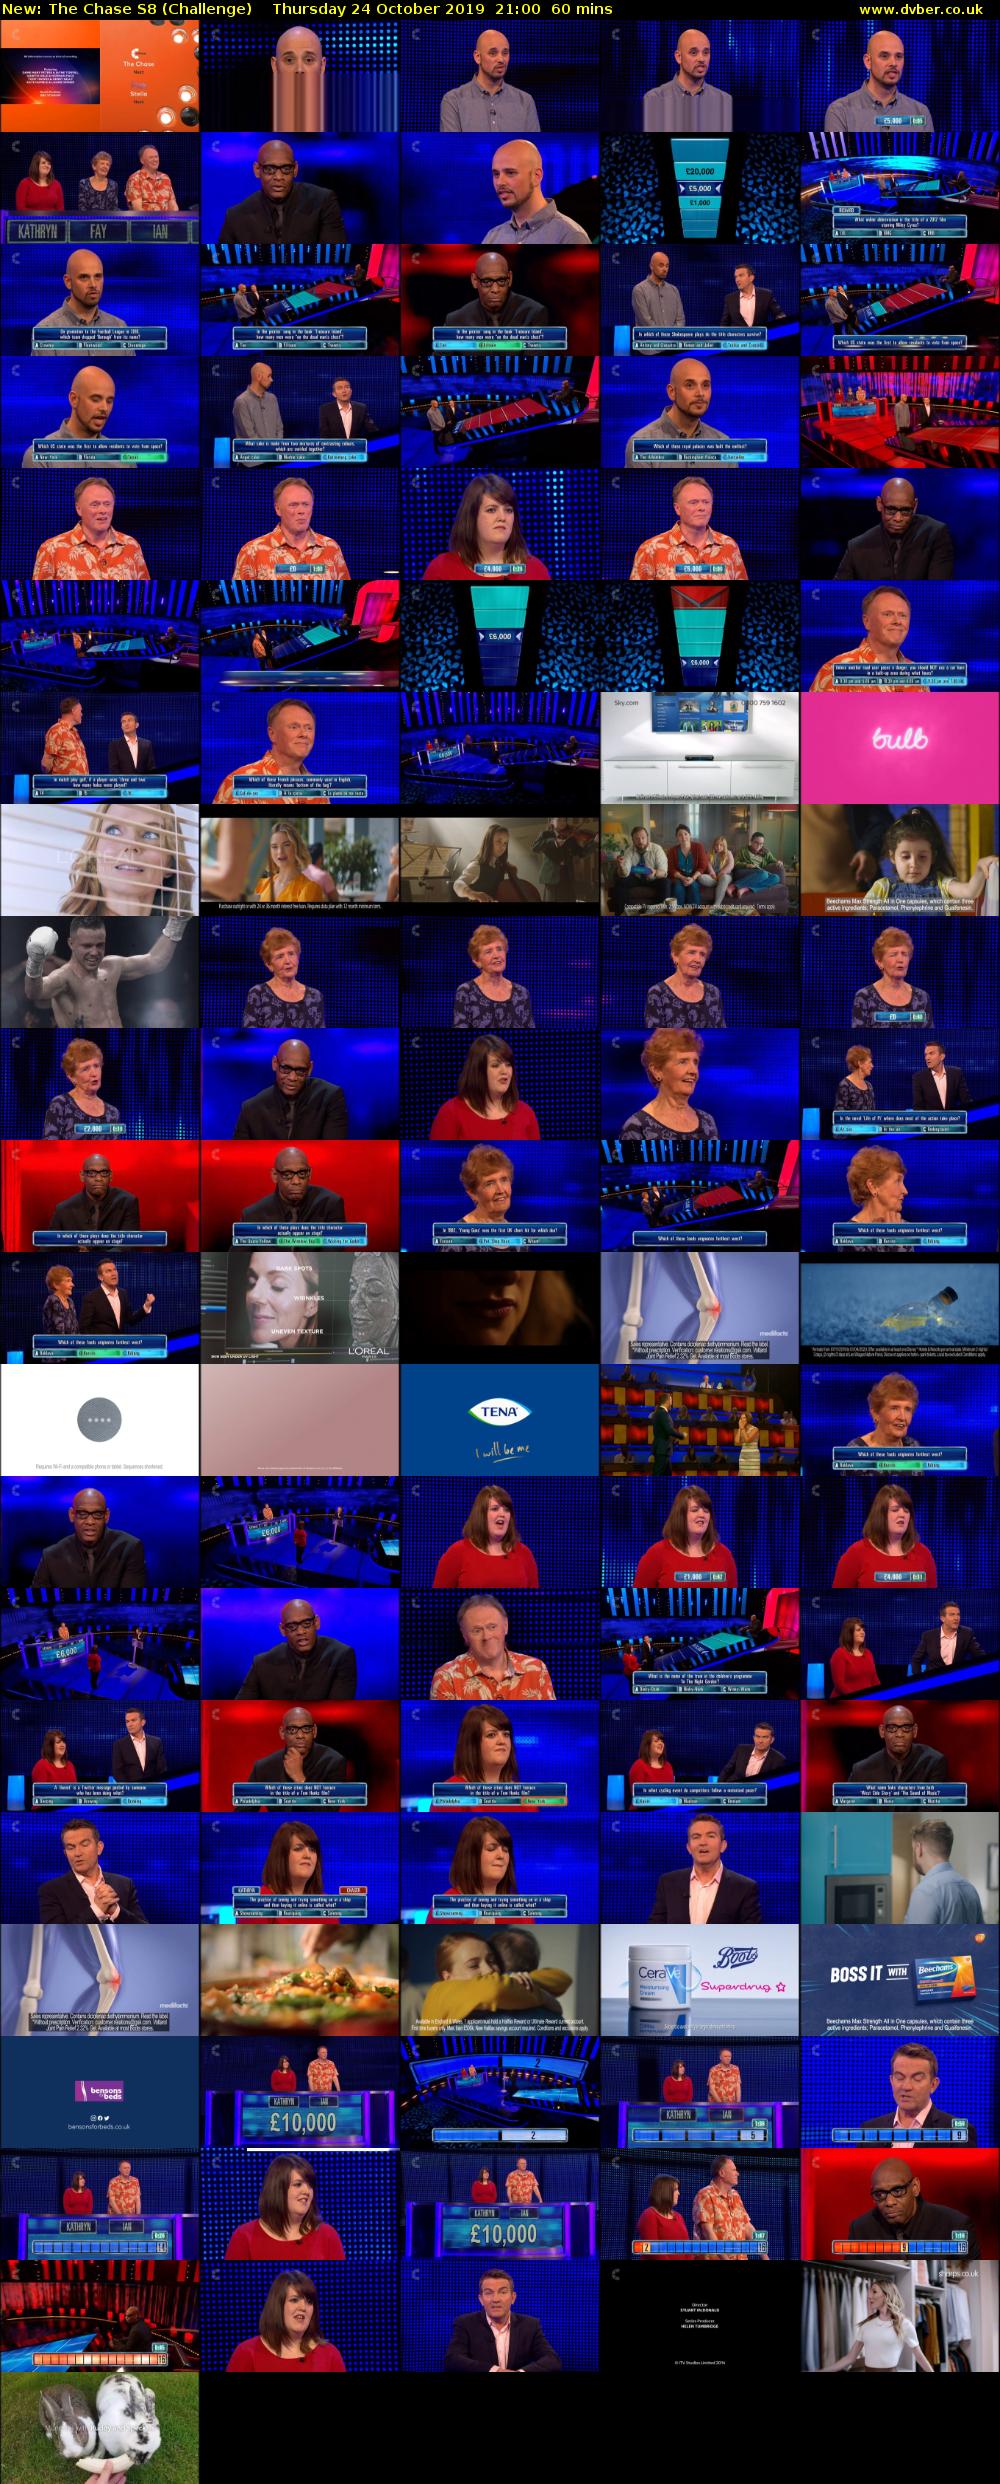 The Chase S8 (Challenge) Thursday 24 October 2019 21:00 - 22:00